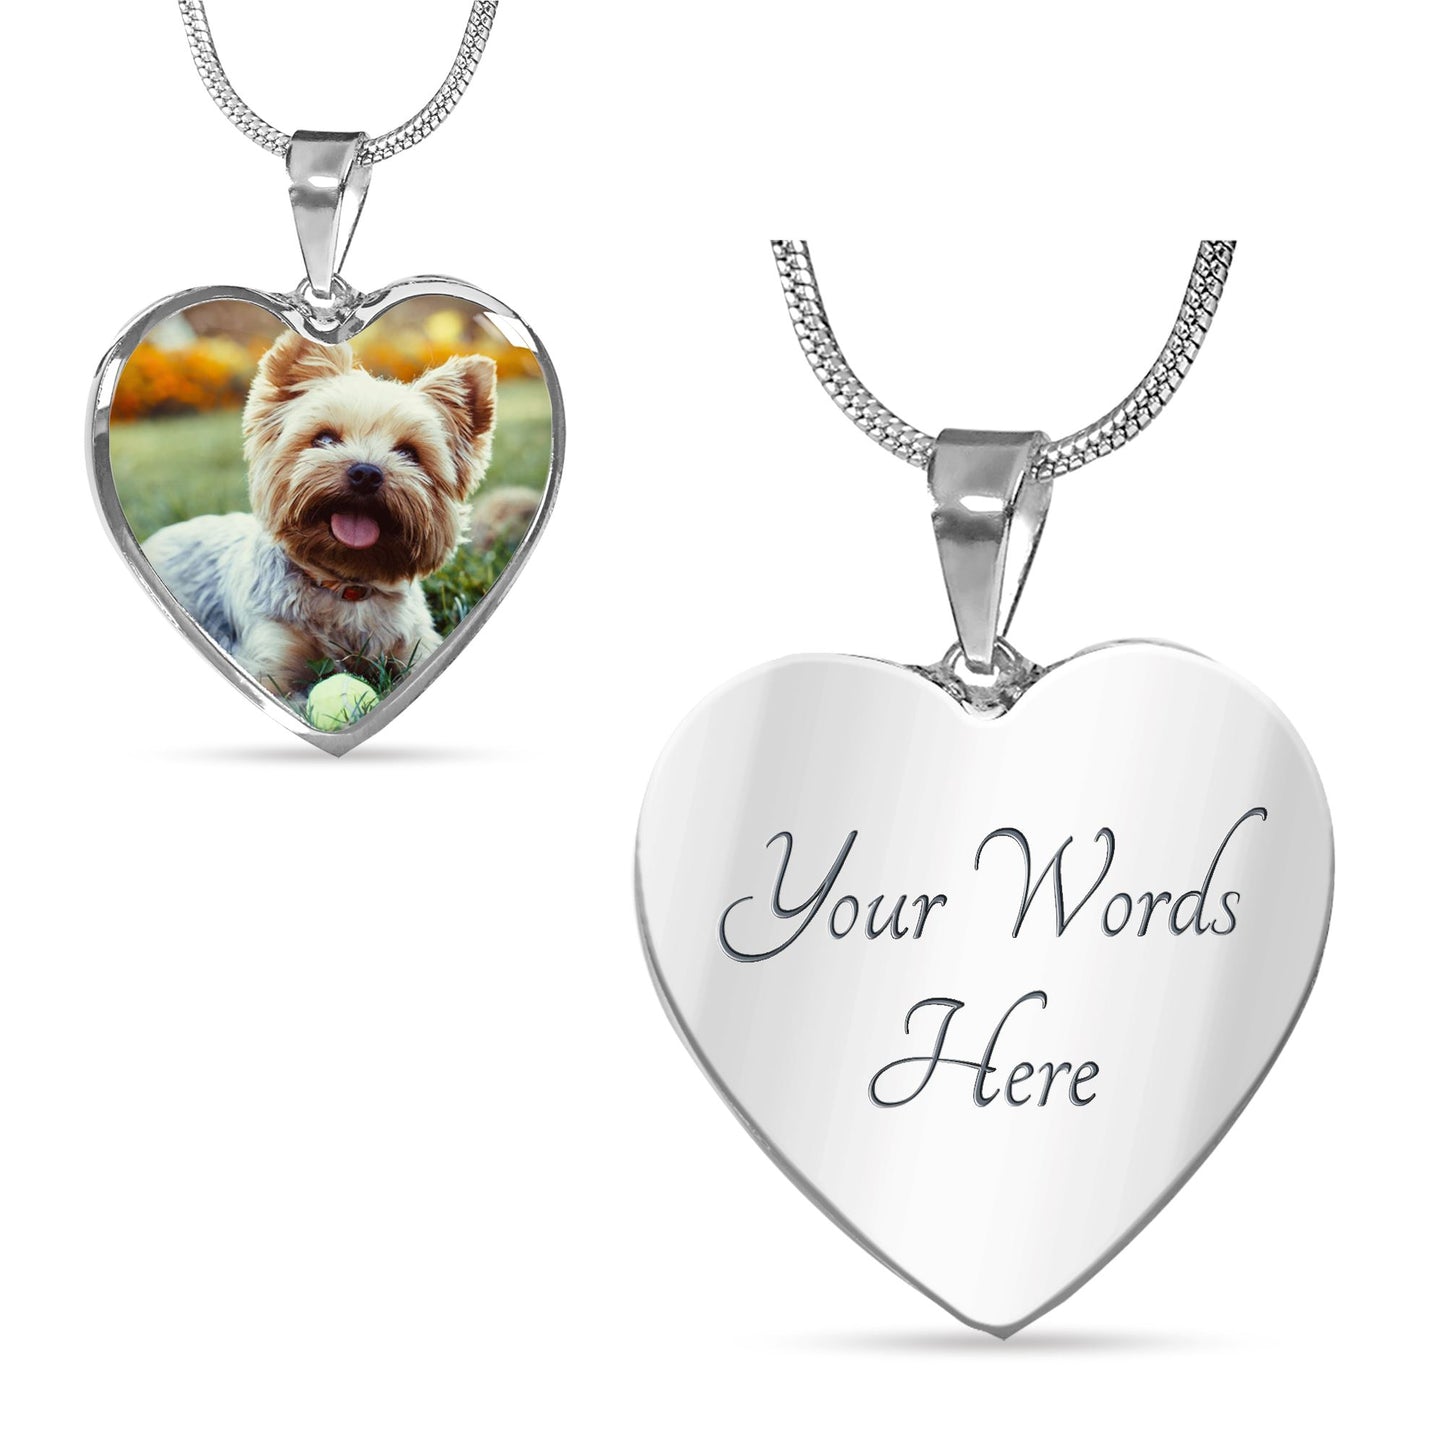 Share The Love For Your Furry Friend With Our Customizable Dog Lover Necklace Jewelry 